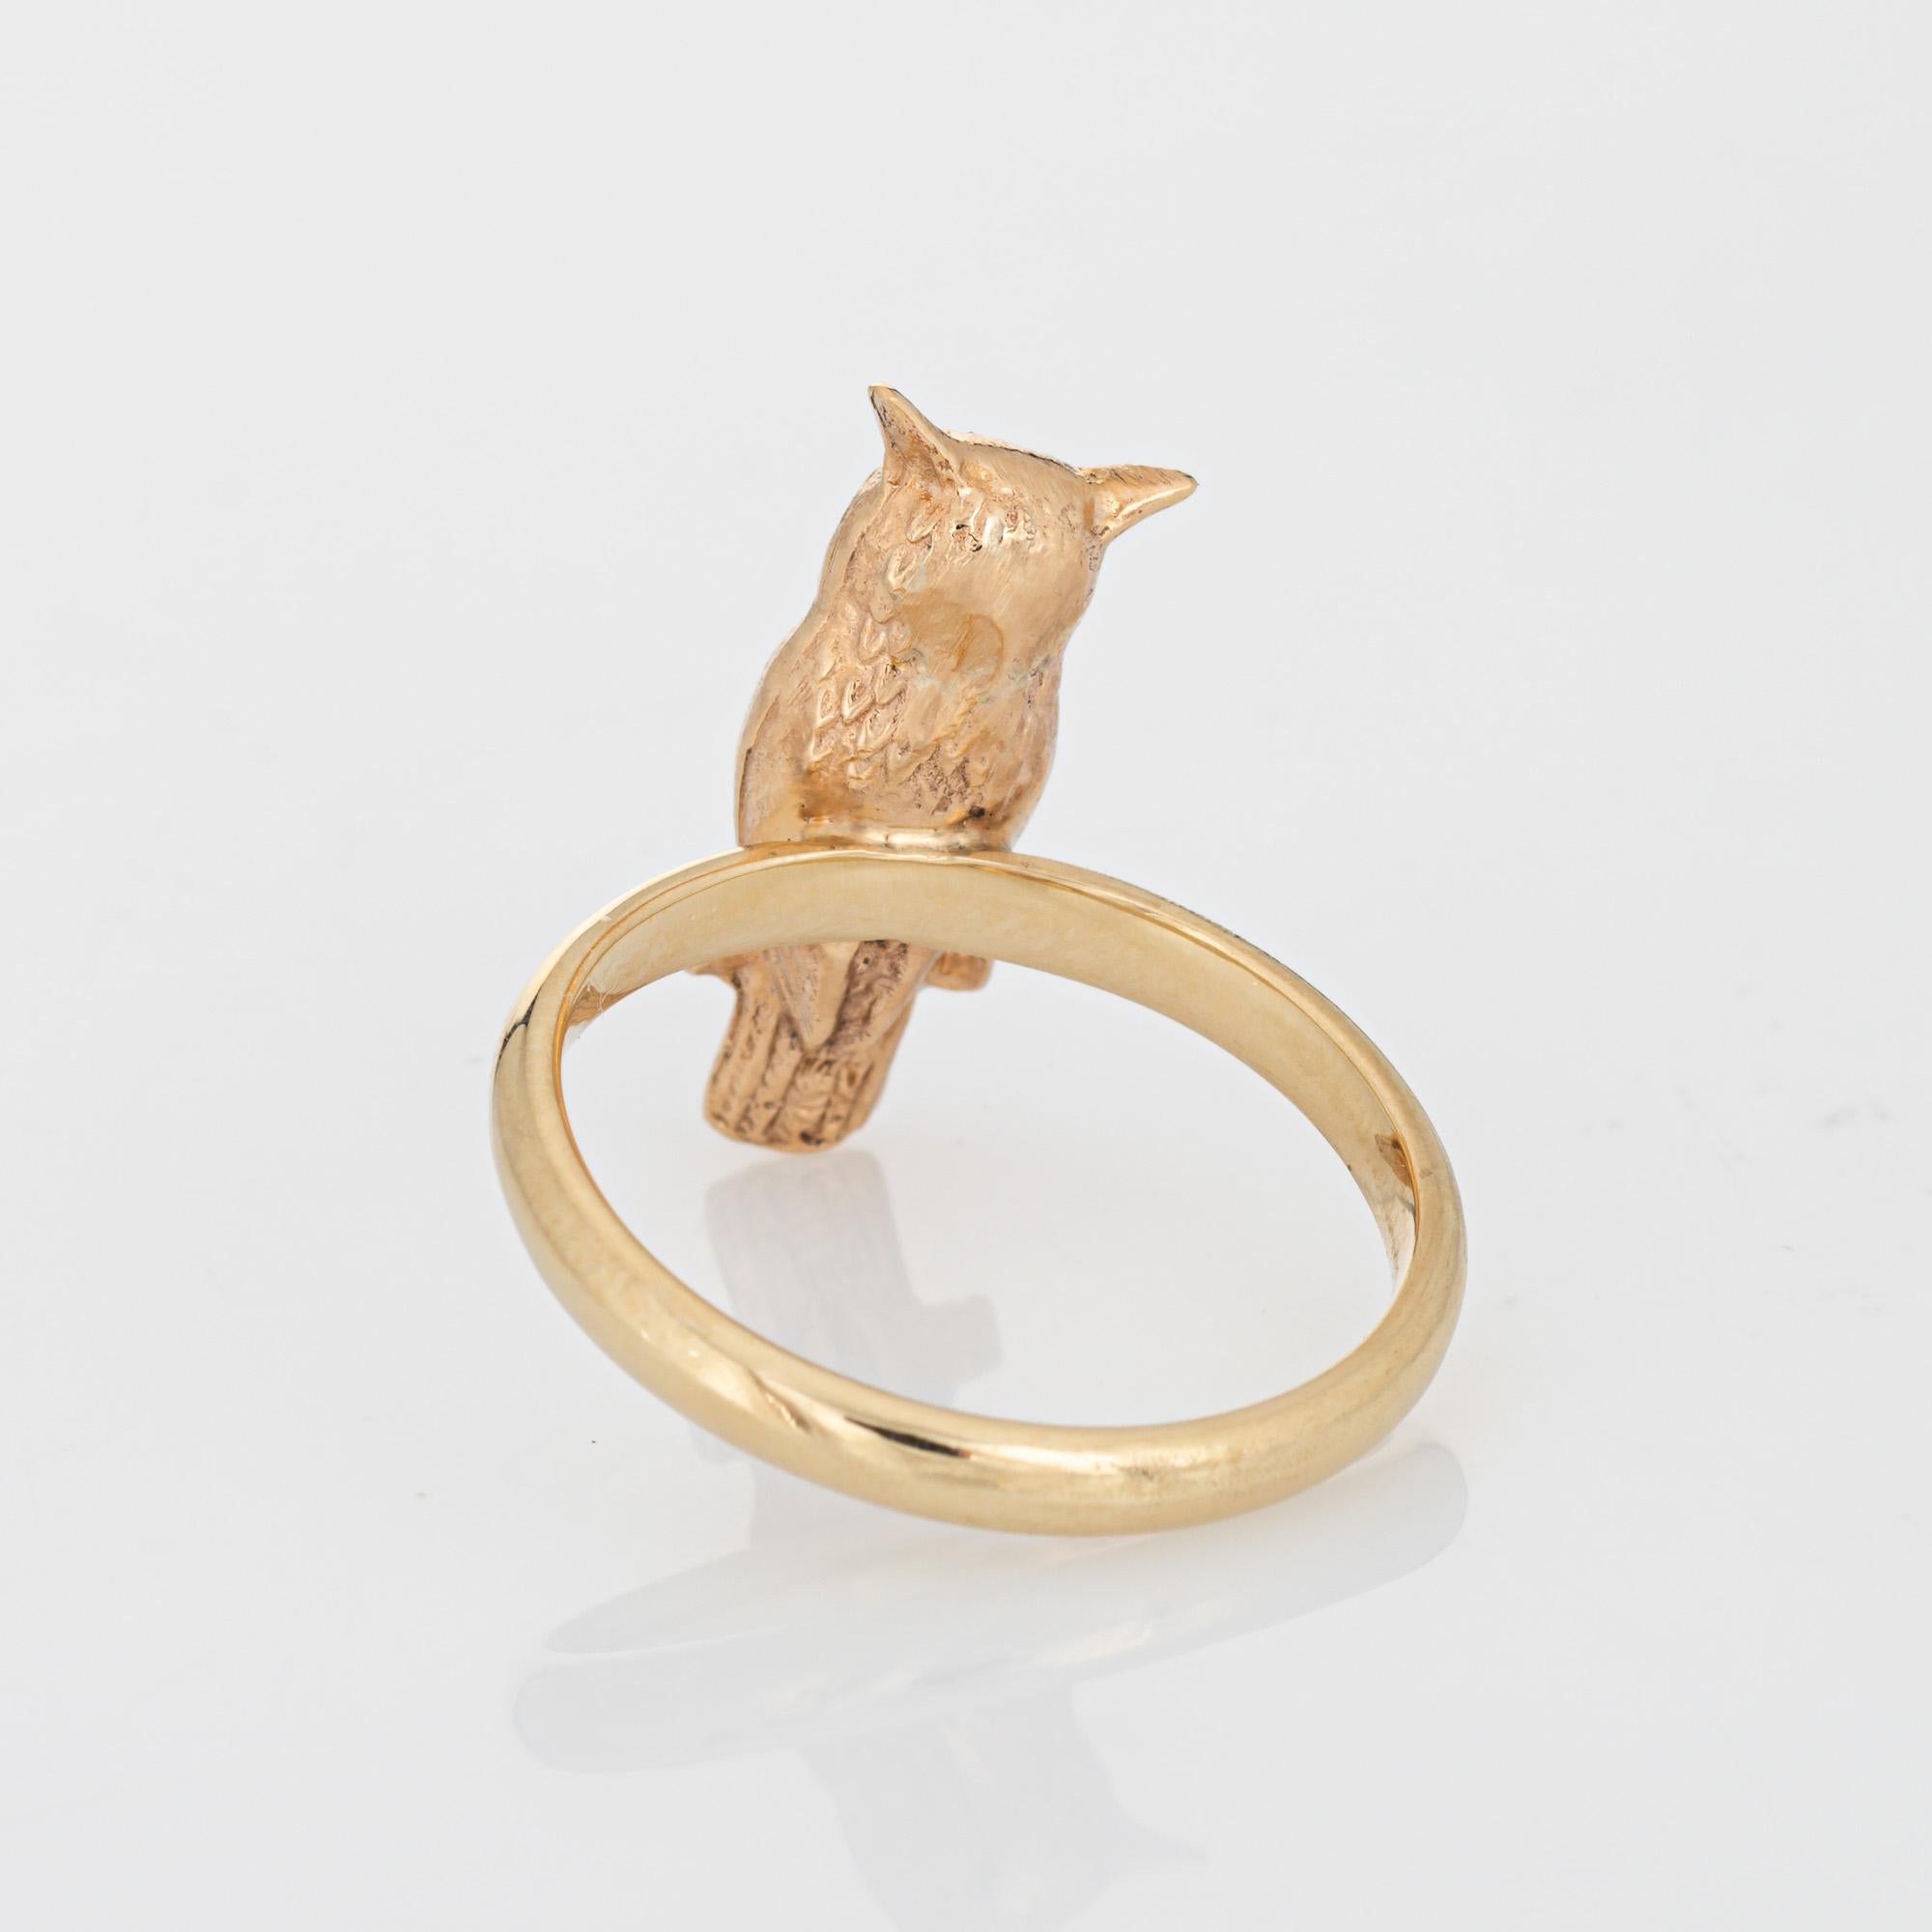 Owl Ring Vintage 14k Yellow Gold Garnet Eyes Estate Fine Jewelry Sz 6.5 In Good Condition For Sale In Torrance, CA